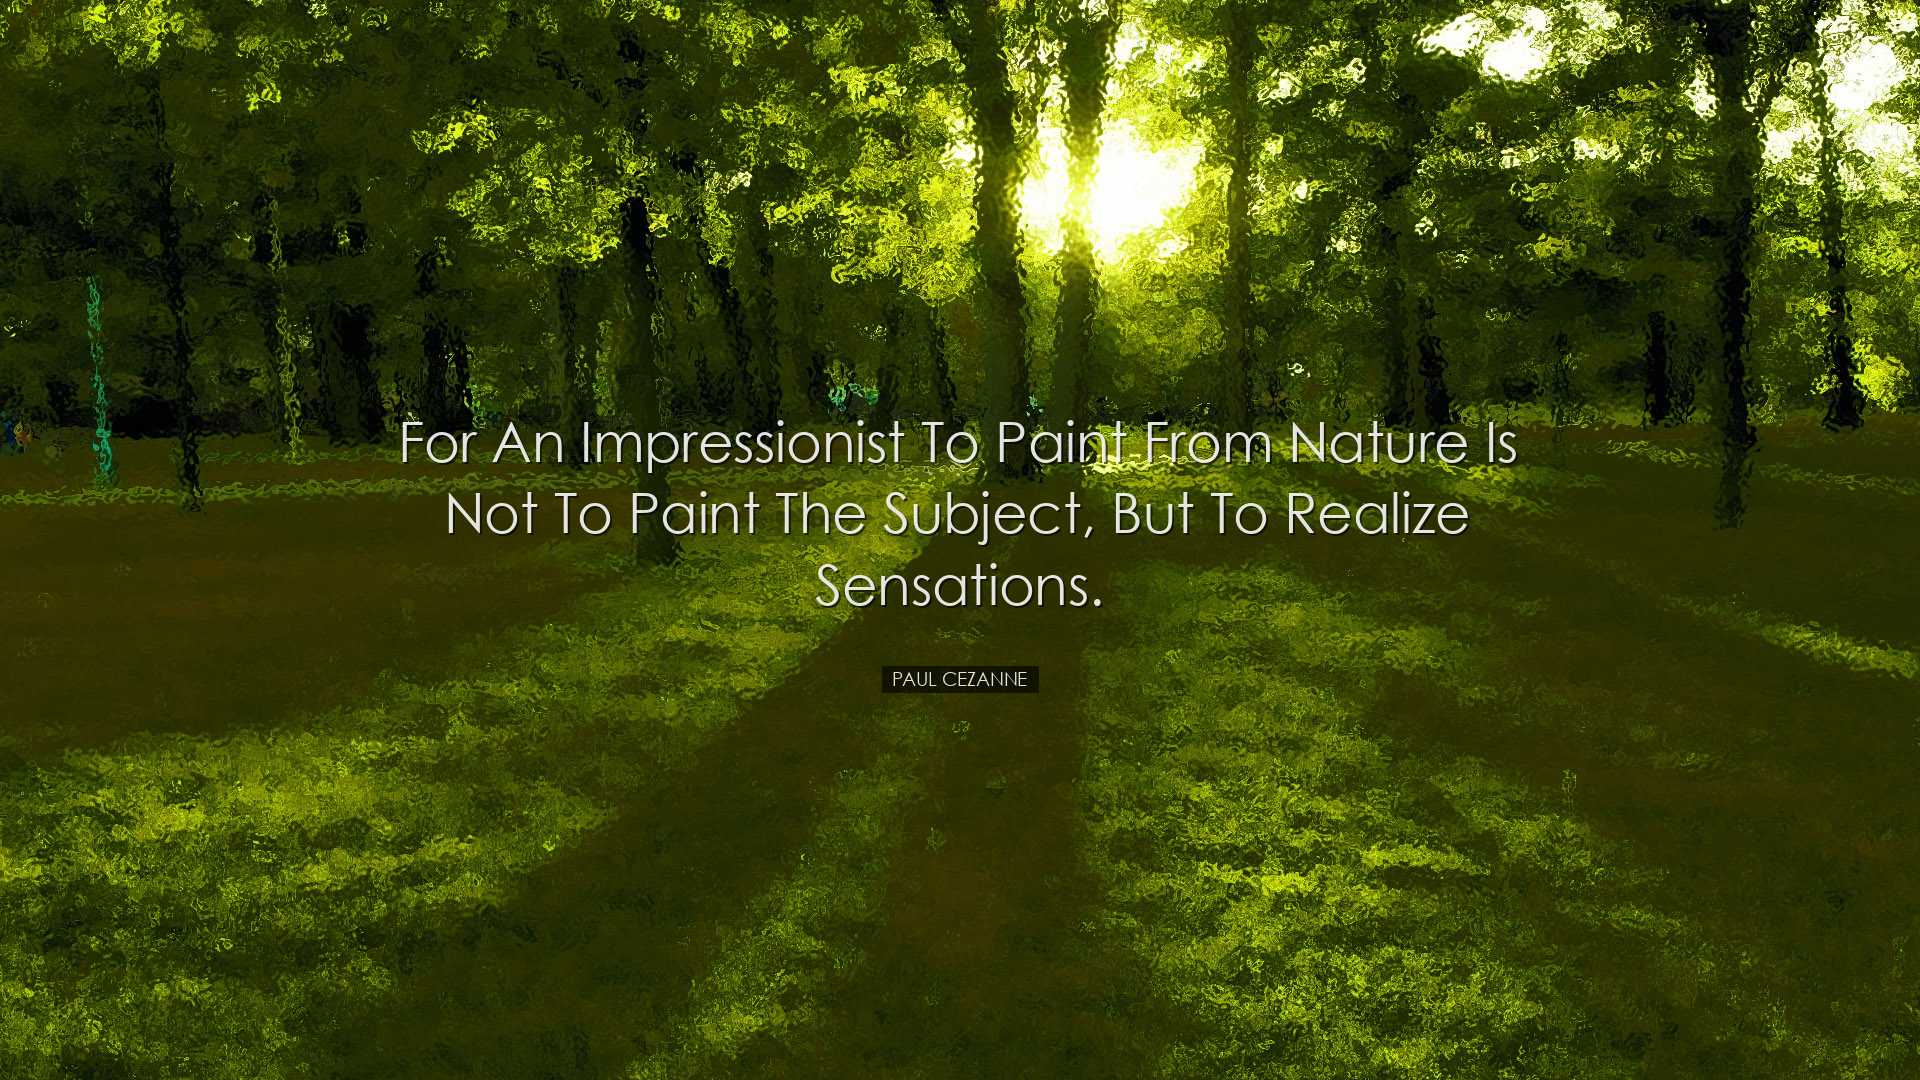 For an Impressionist to paint from nature is not to paint the subj